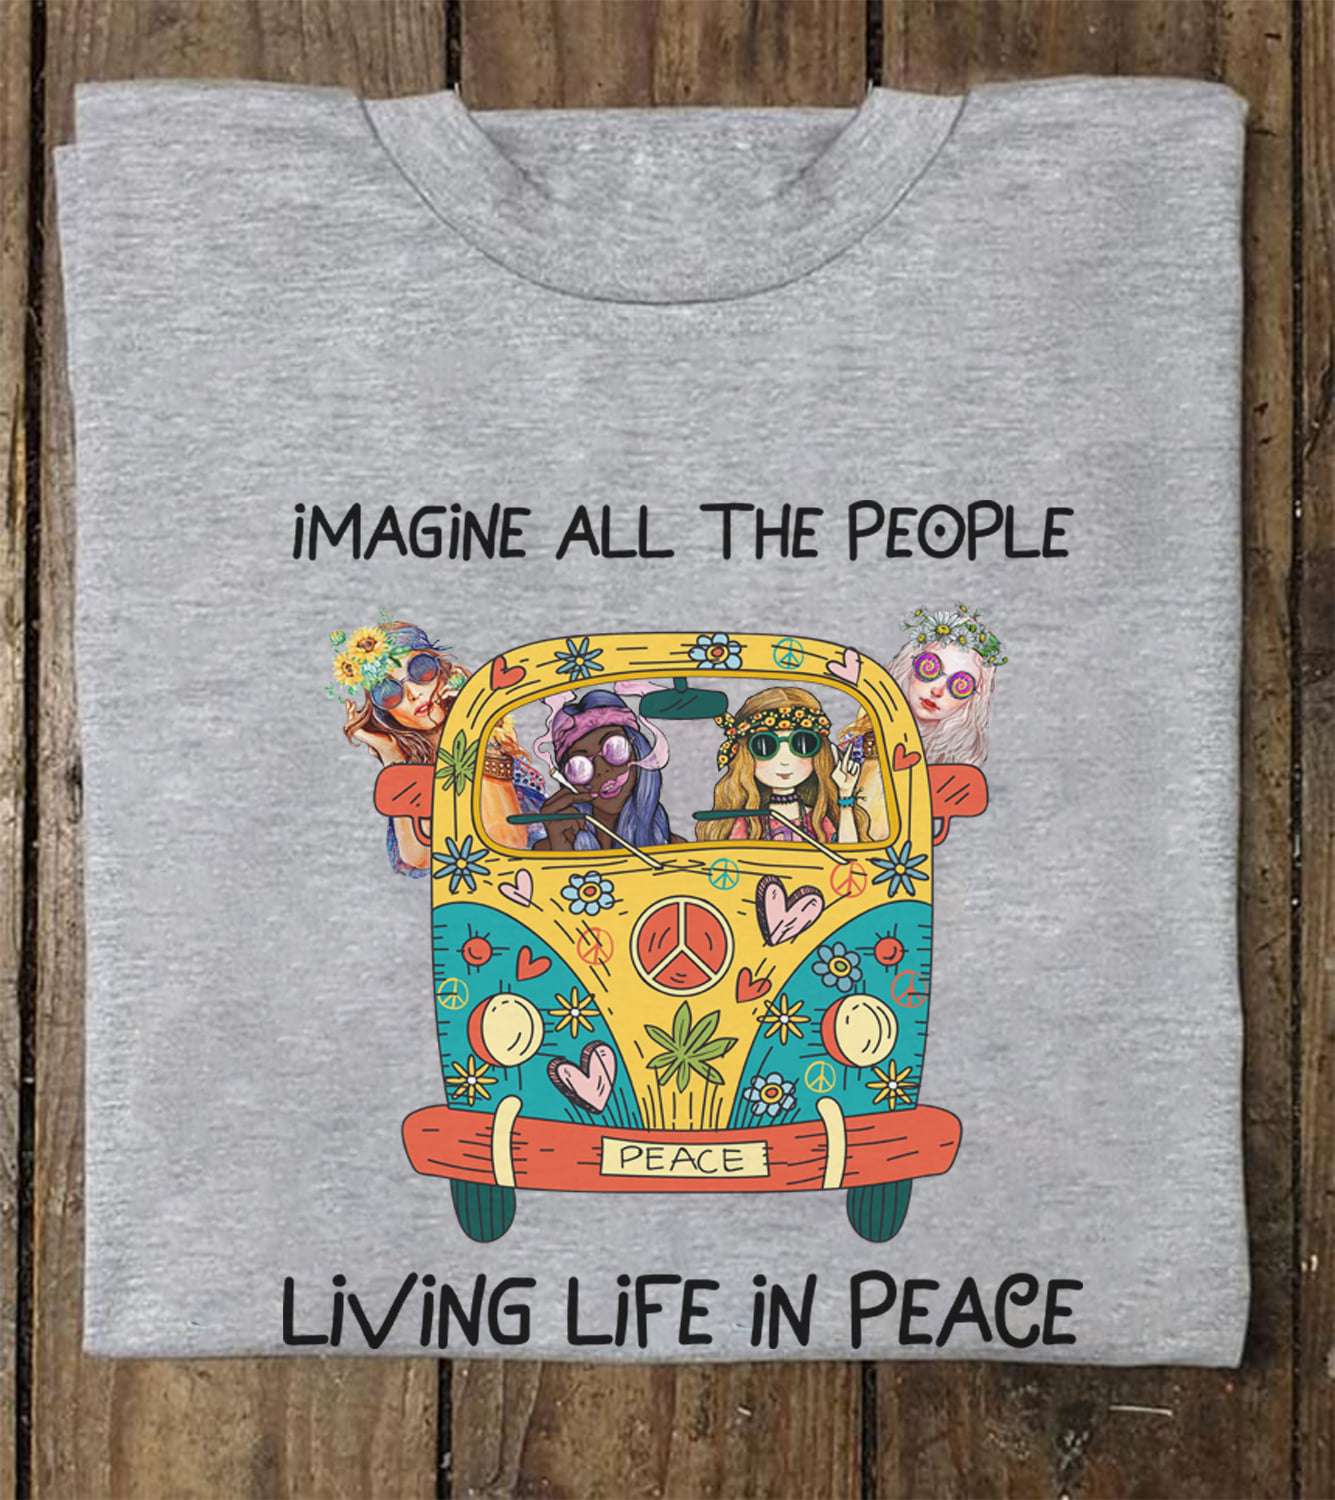 The Hippie Van - Imagine all the people living life in peace